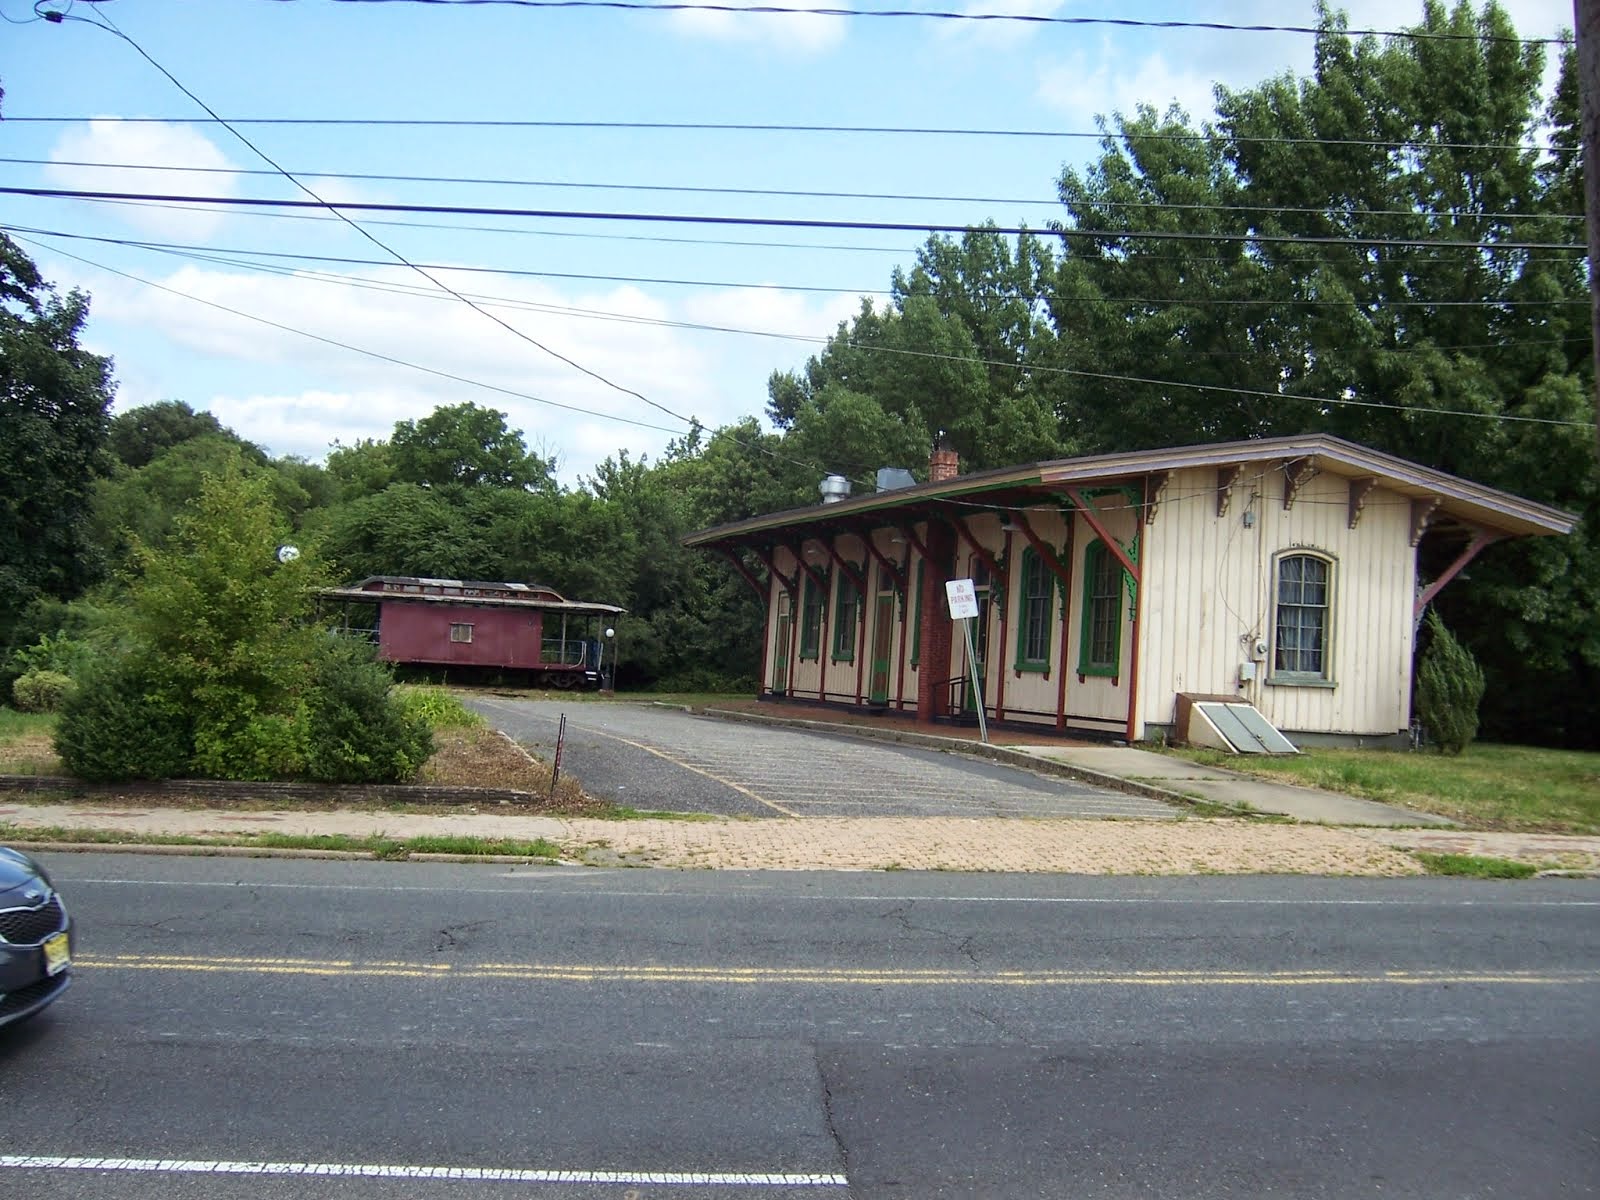 Mount Holly Train Station